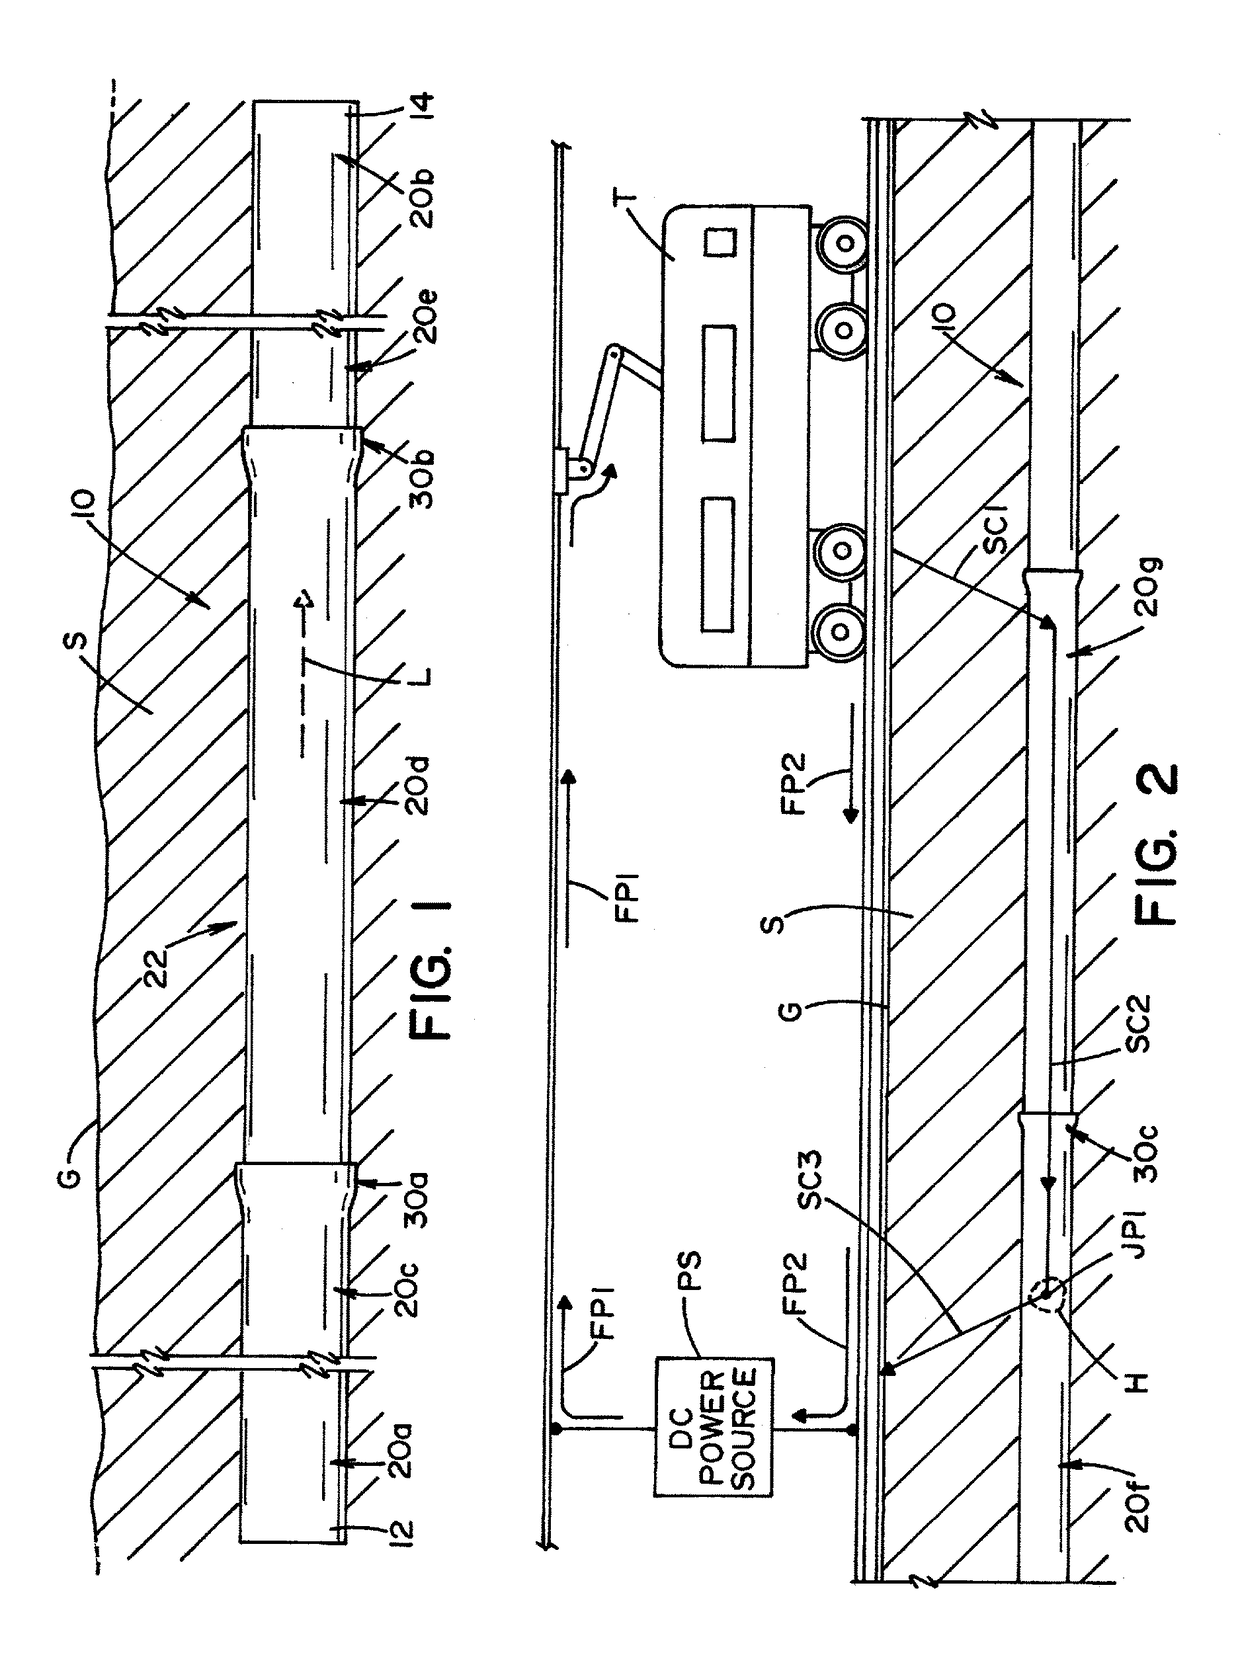 Intrinsically conduct joint for metallic pipe and method of using the same